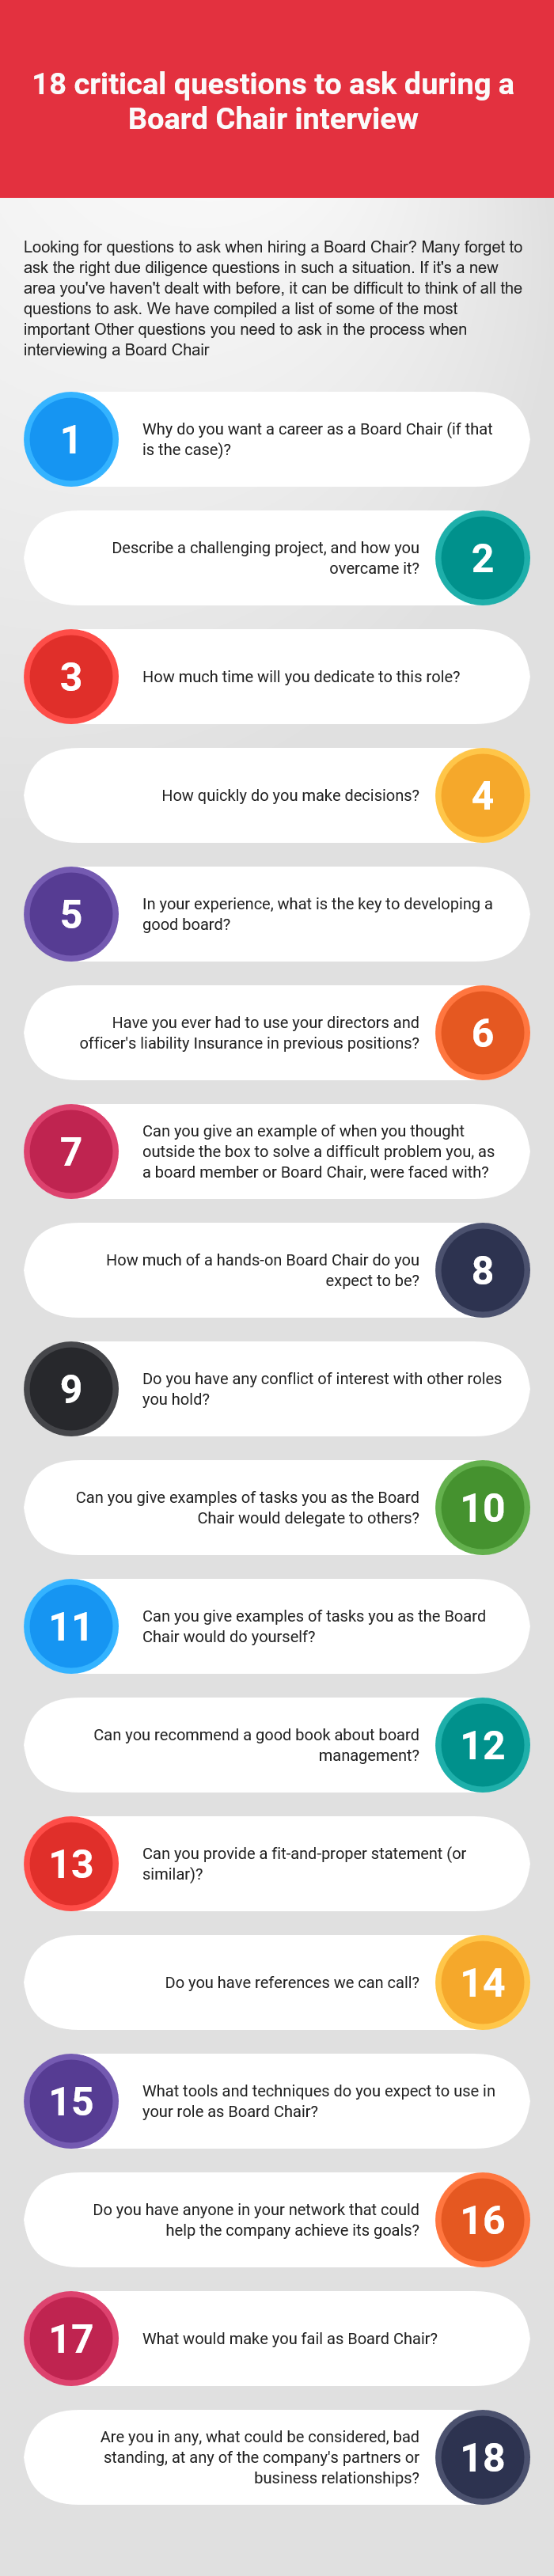 18 critical questions to ask during a Board Chair interview